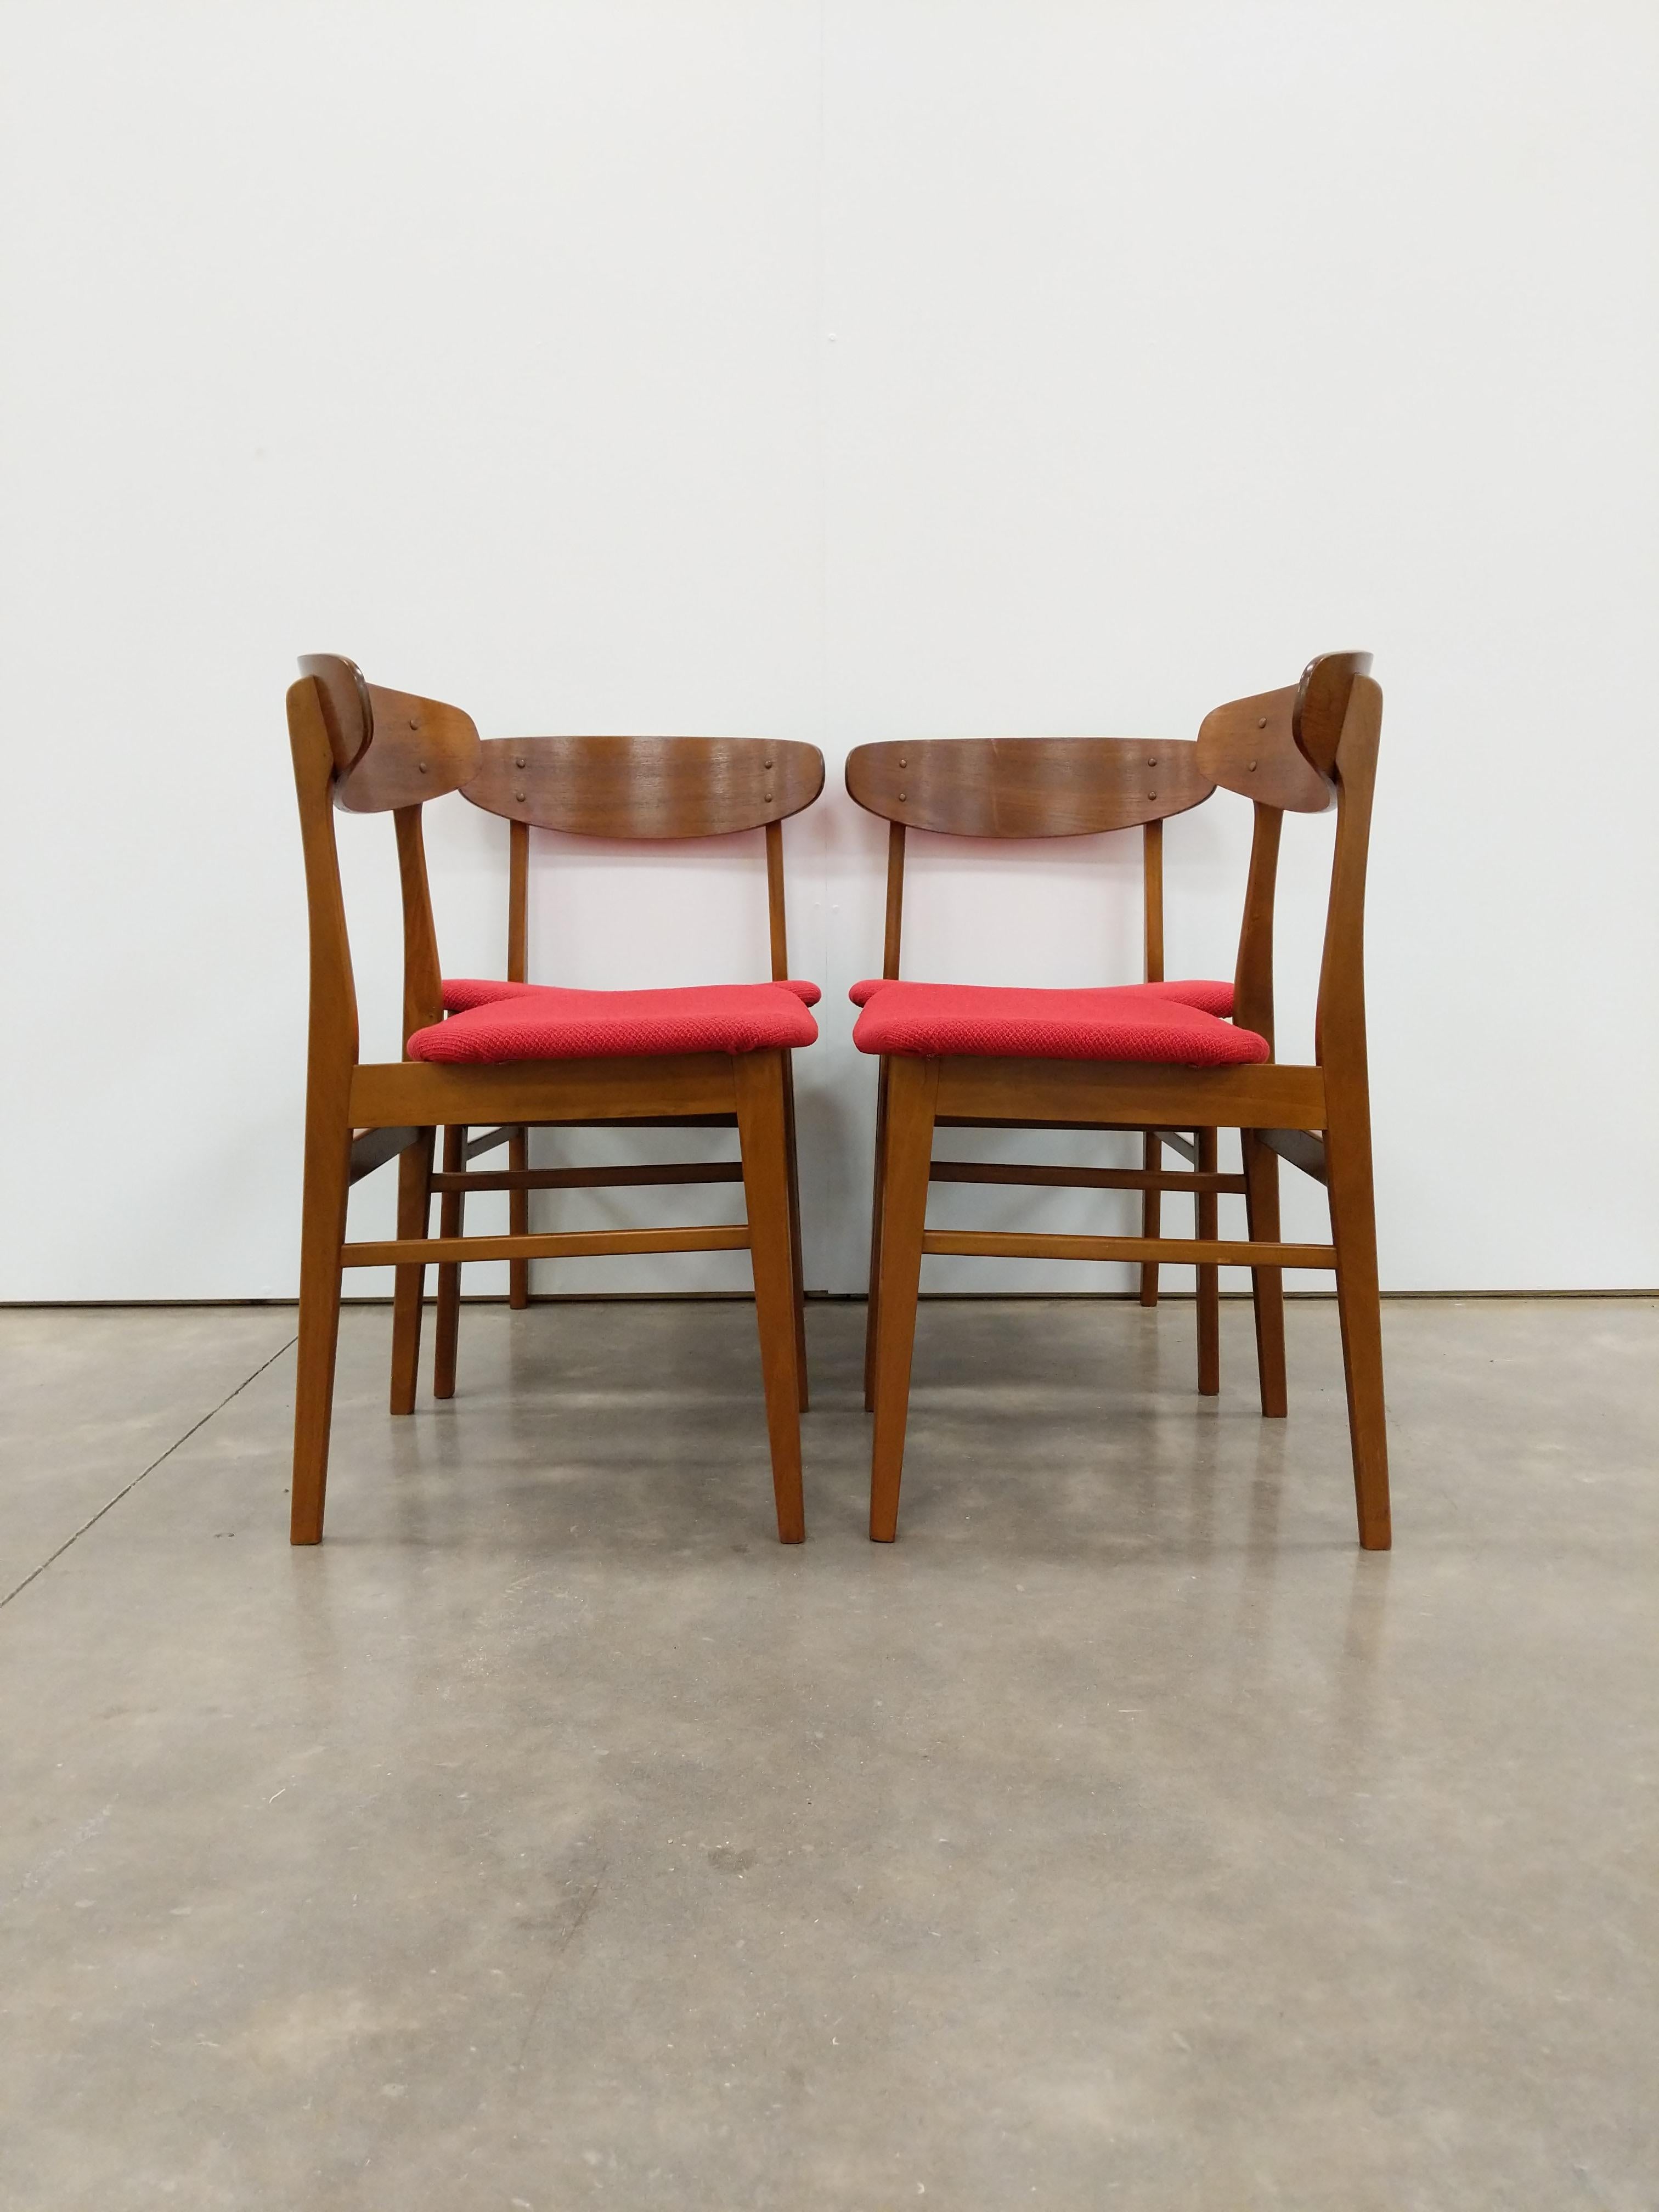 Set of 4 authentic vintage mid century Danish / Scandinavian Modern dining chairs.

This set is in excellent refurbished condition with brand new Knoll upholstery.

If you would like any additional details, please contact us.

Dimensions:
31.25”